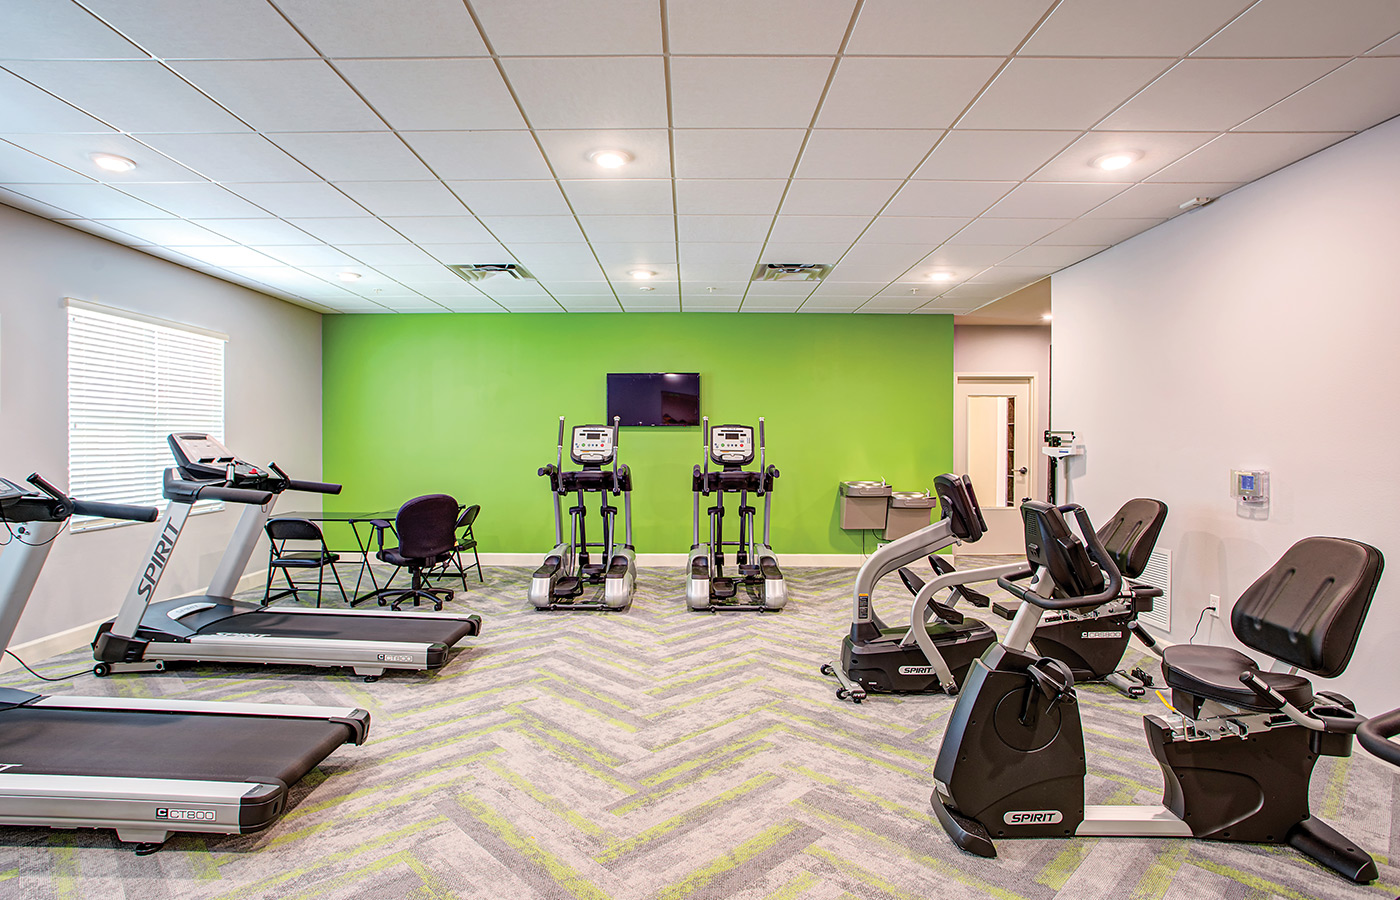 The fitness center at The Glades at ChampionsGate.